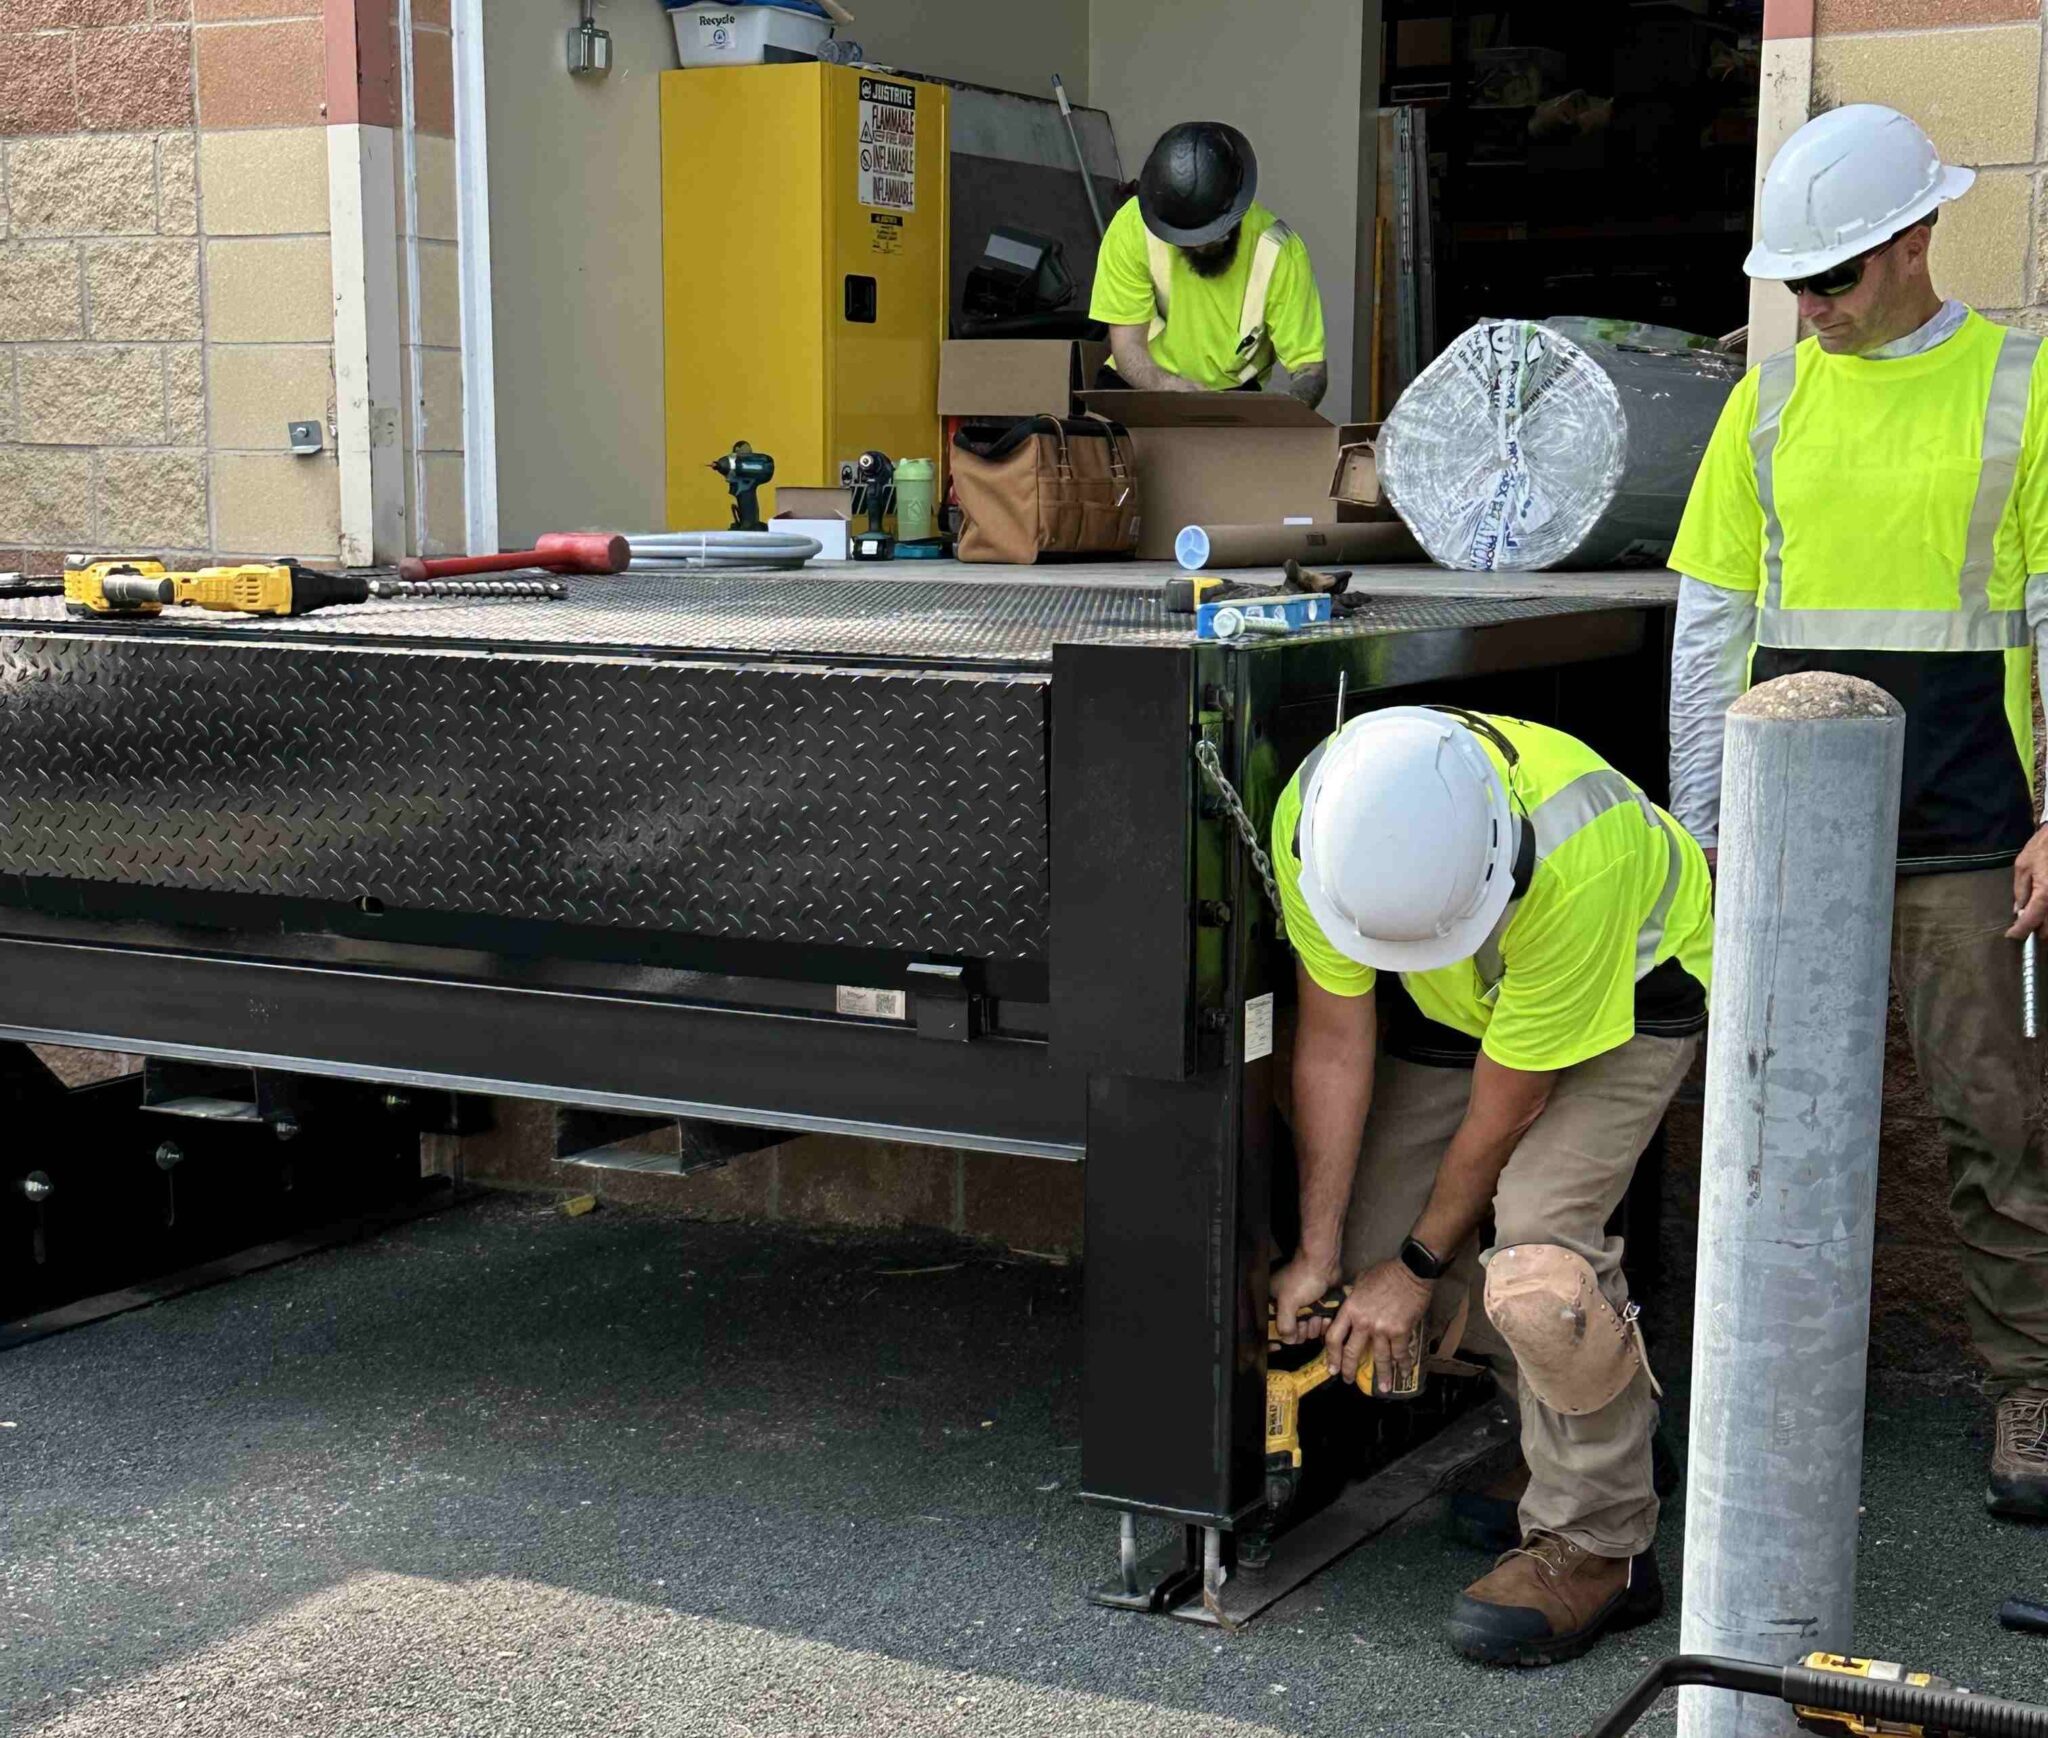 Workers bolt dock leveler frame to the ground